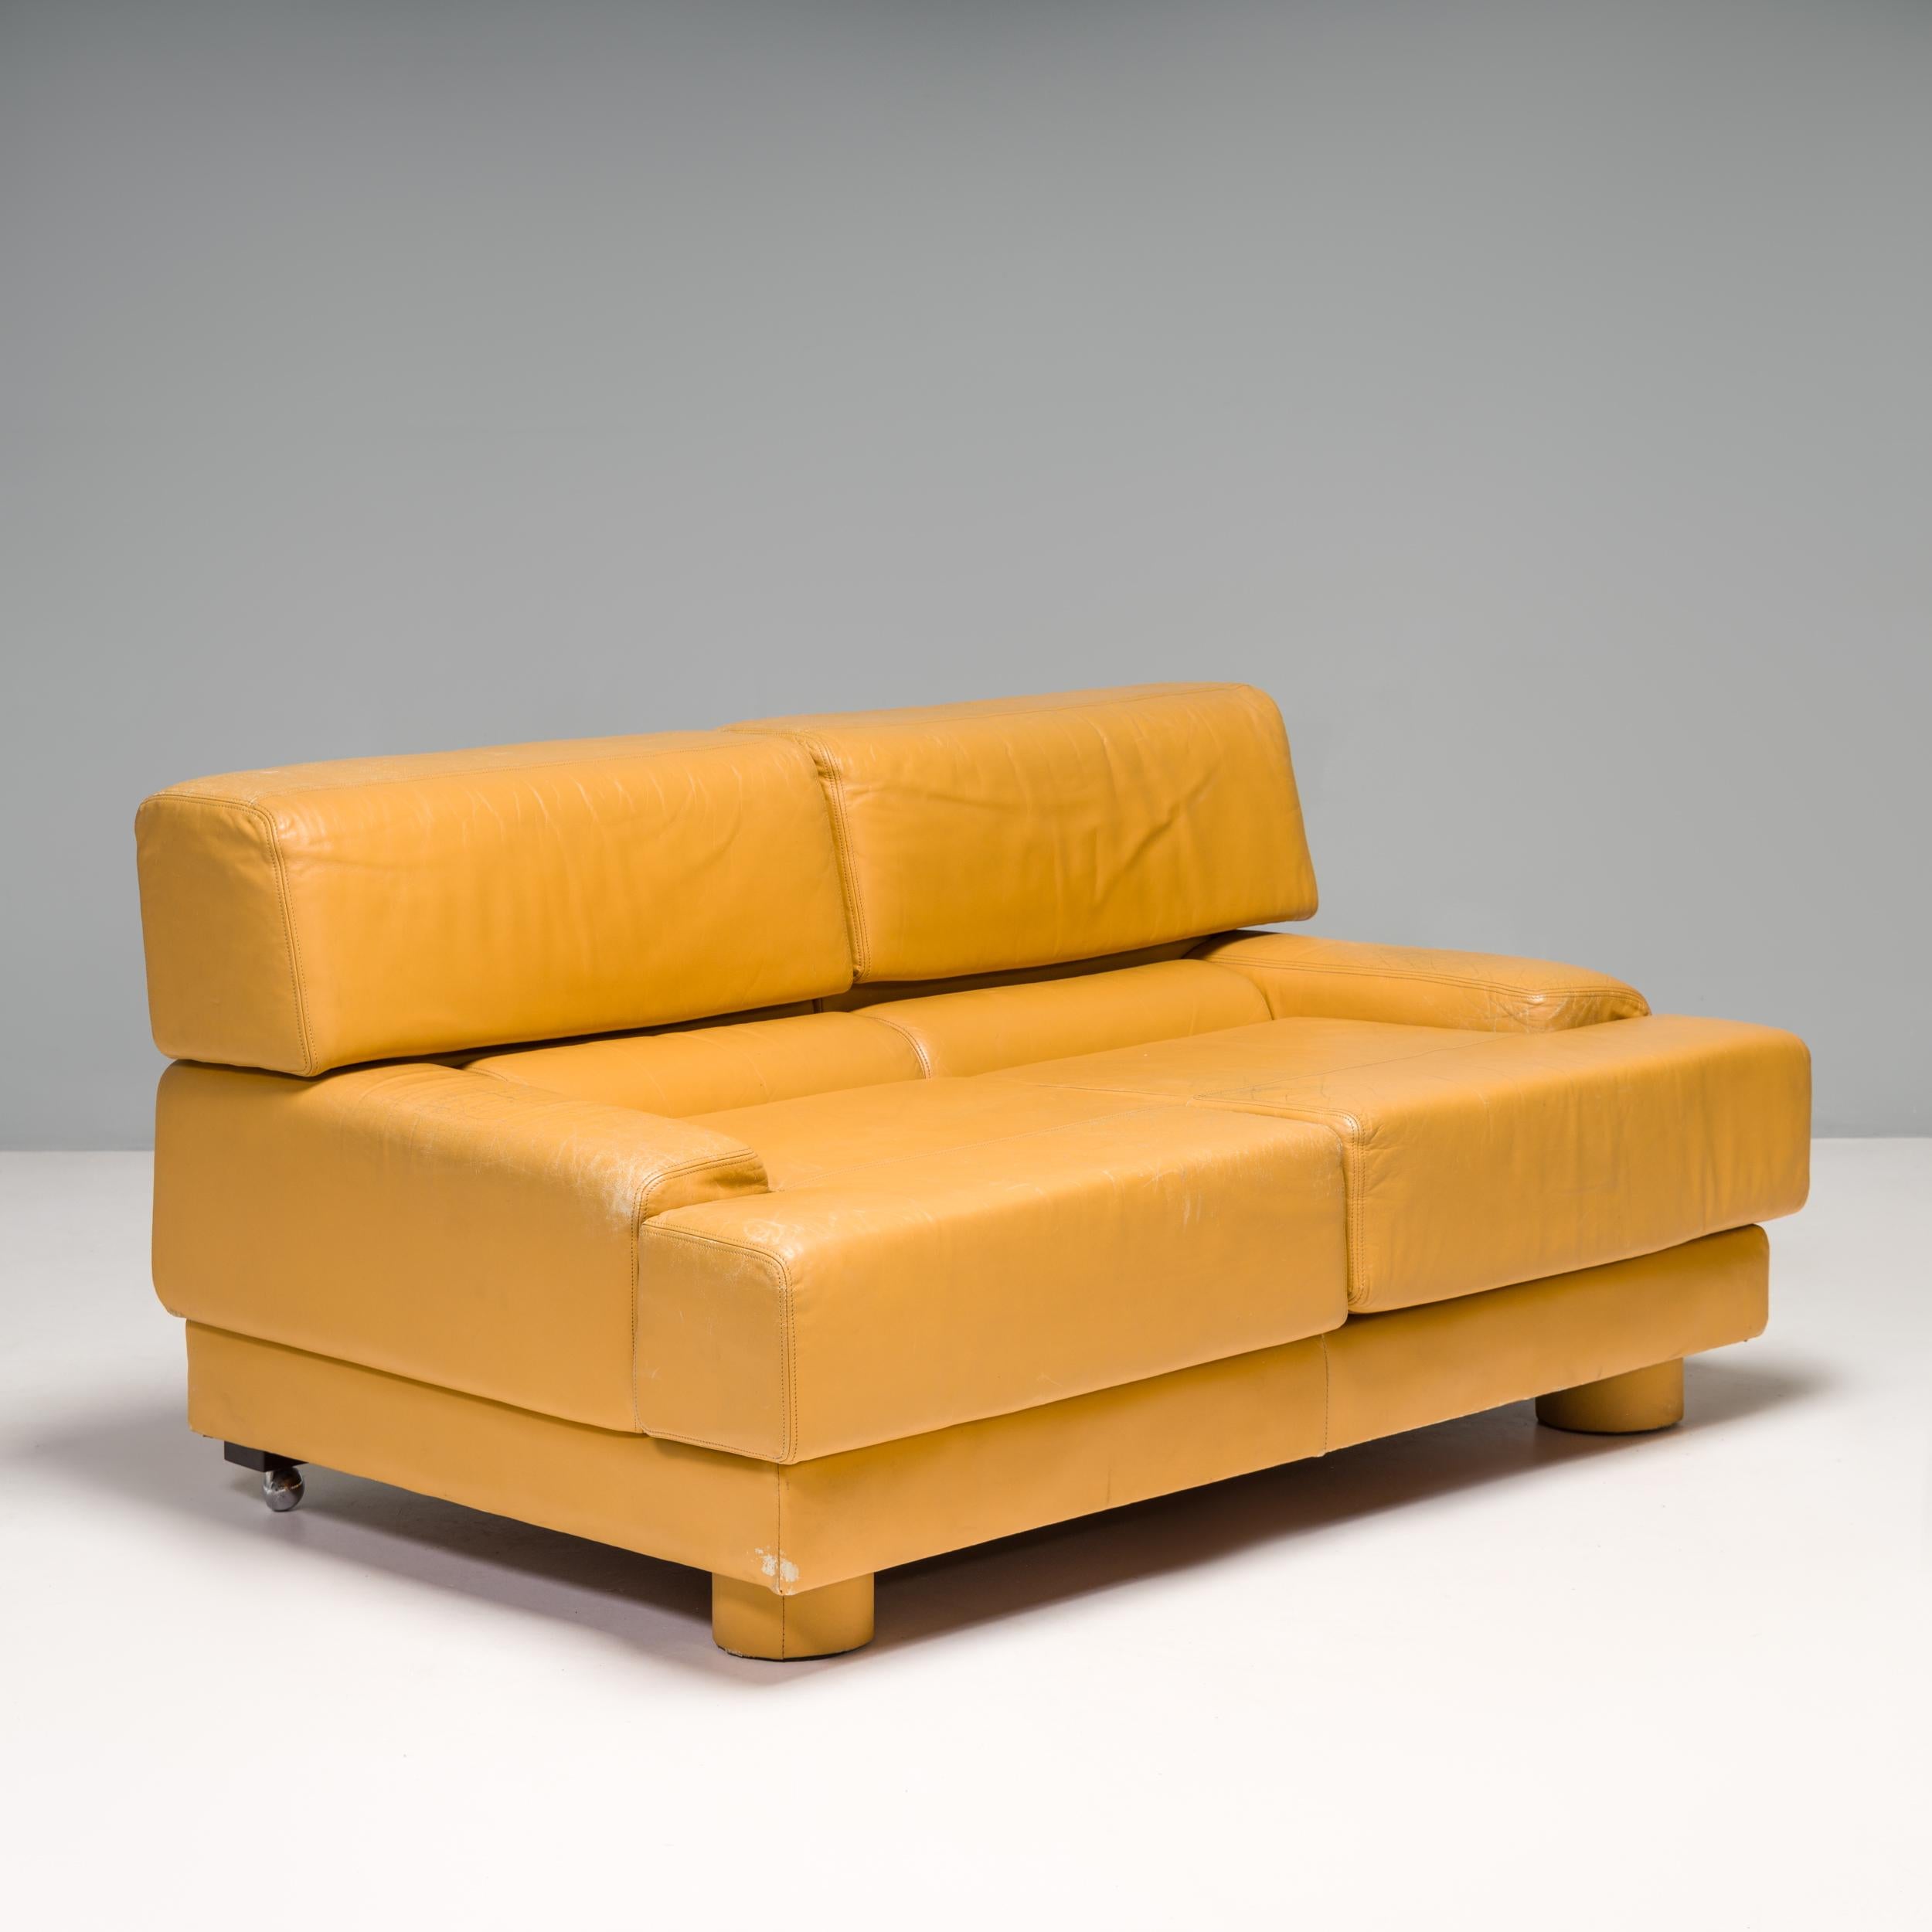 Originally designed by Percival Lafer & produced by LAFER in São Paulo, this 1960s sofa is a fantastic example of Brazilian mid-century design.

Featuring a boxy silhouette, the sofa is fully upholstered in the original yellow leather with